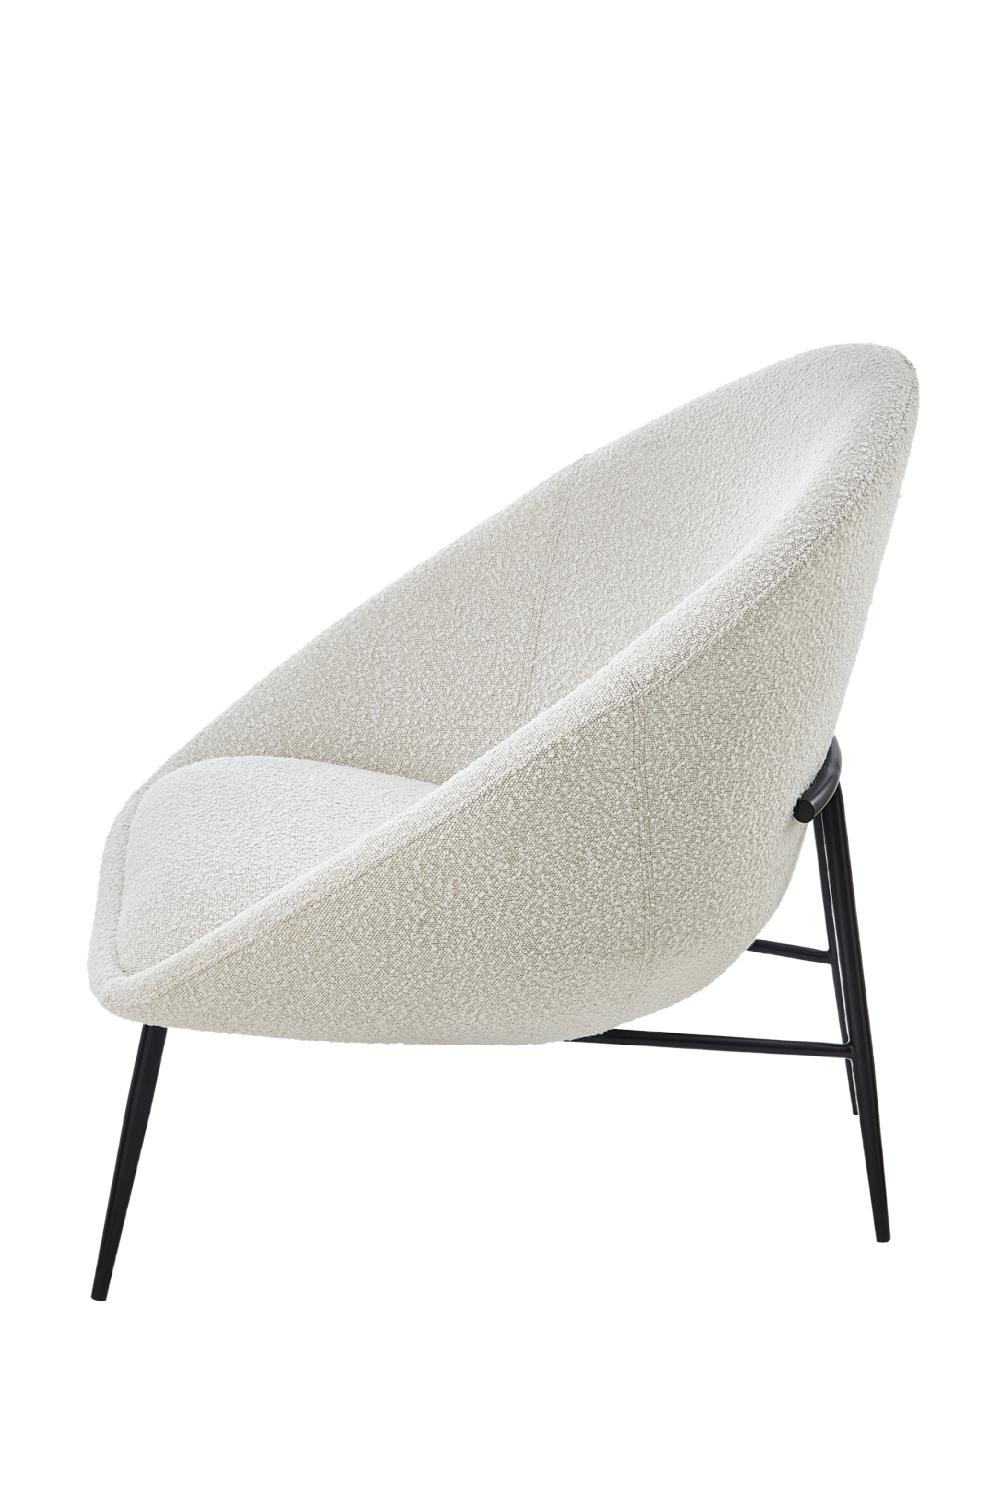 Rounded Bouclé Occasional Chair | Liang & Eimil Ovalo | OROA.com